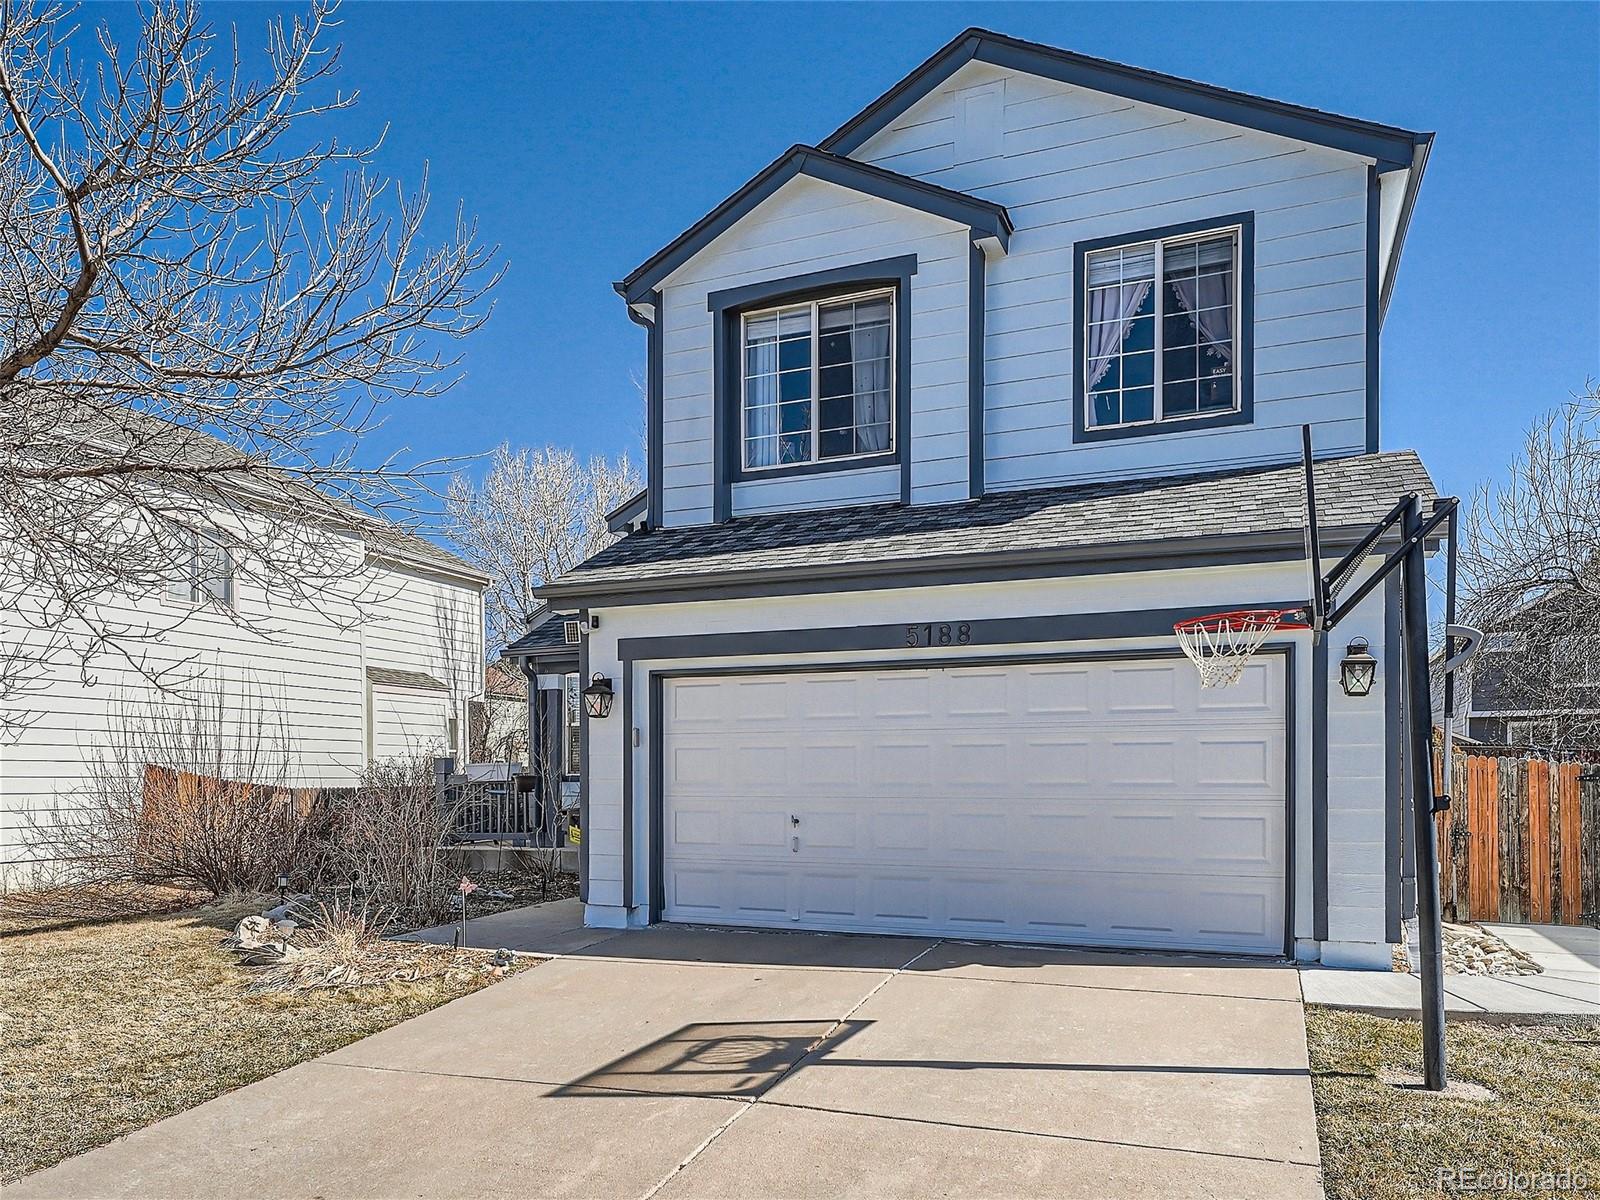 5188 s malaya court, Centennial sold home. Closed on 2024-04-15 for $549,000.